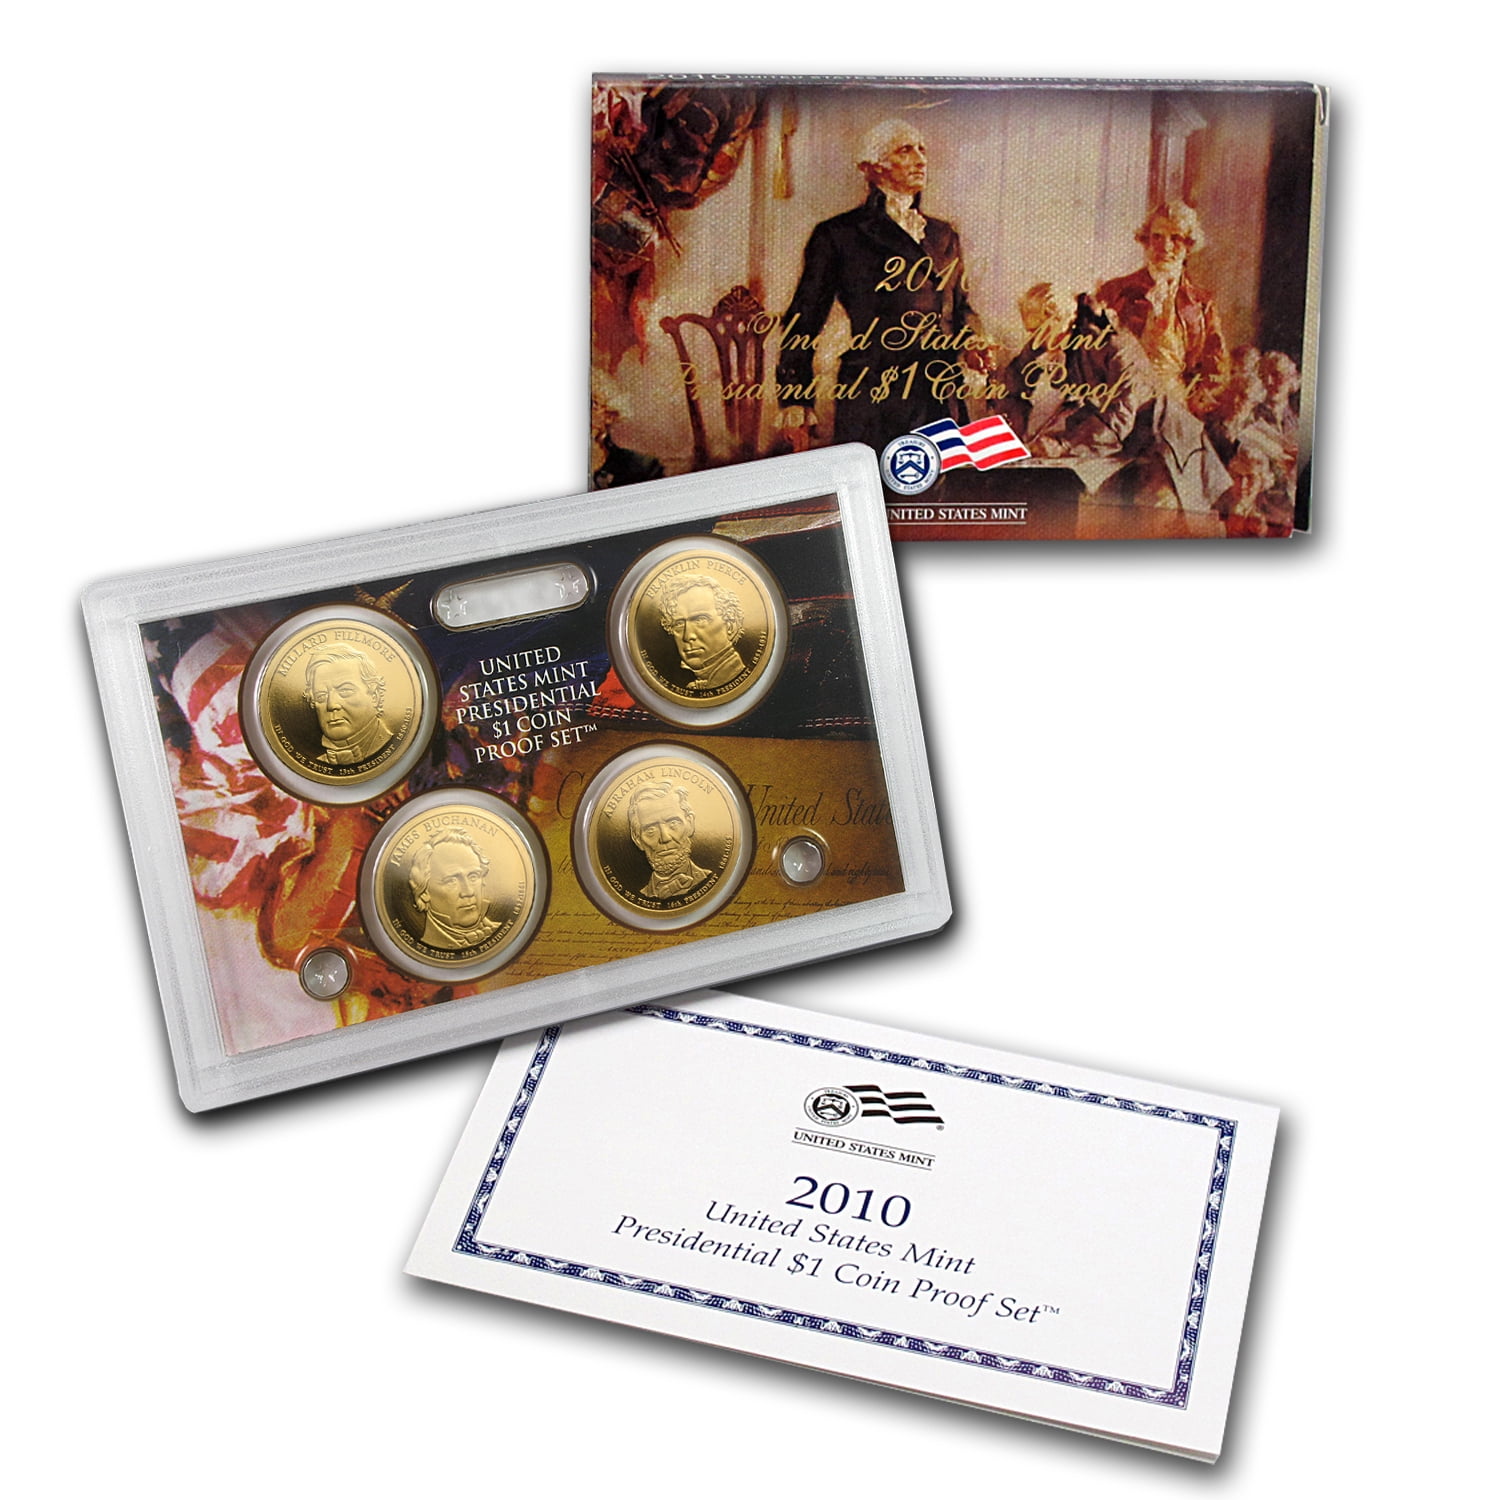 WITH BOX/COA 2007-S U S MINT PRESIDENTIAL $1 COIN PROOF SET 